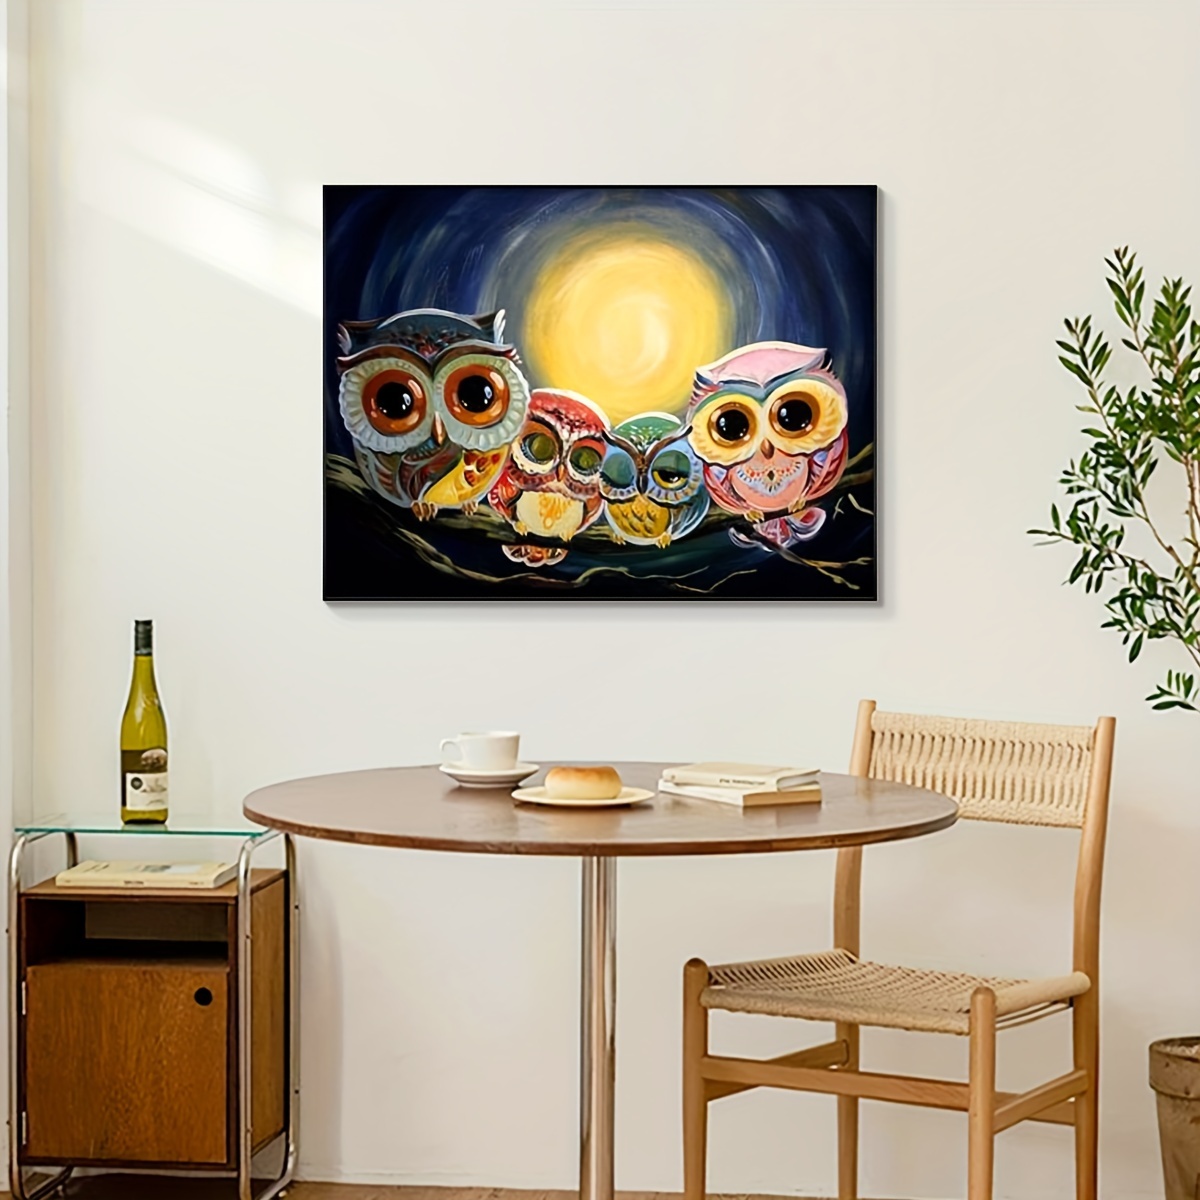 1set 33x45cm/13.8x17.7inch Round Drill Canvas Owl Home Living Room Dining  Room Wall Decor Holiday Gift For Family Friends Diamond Painting DIY Diamond